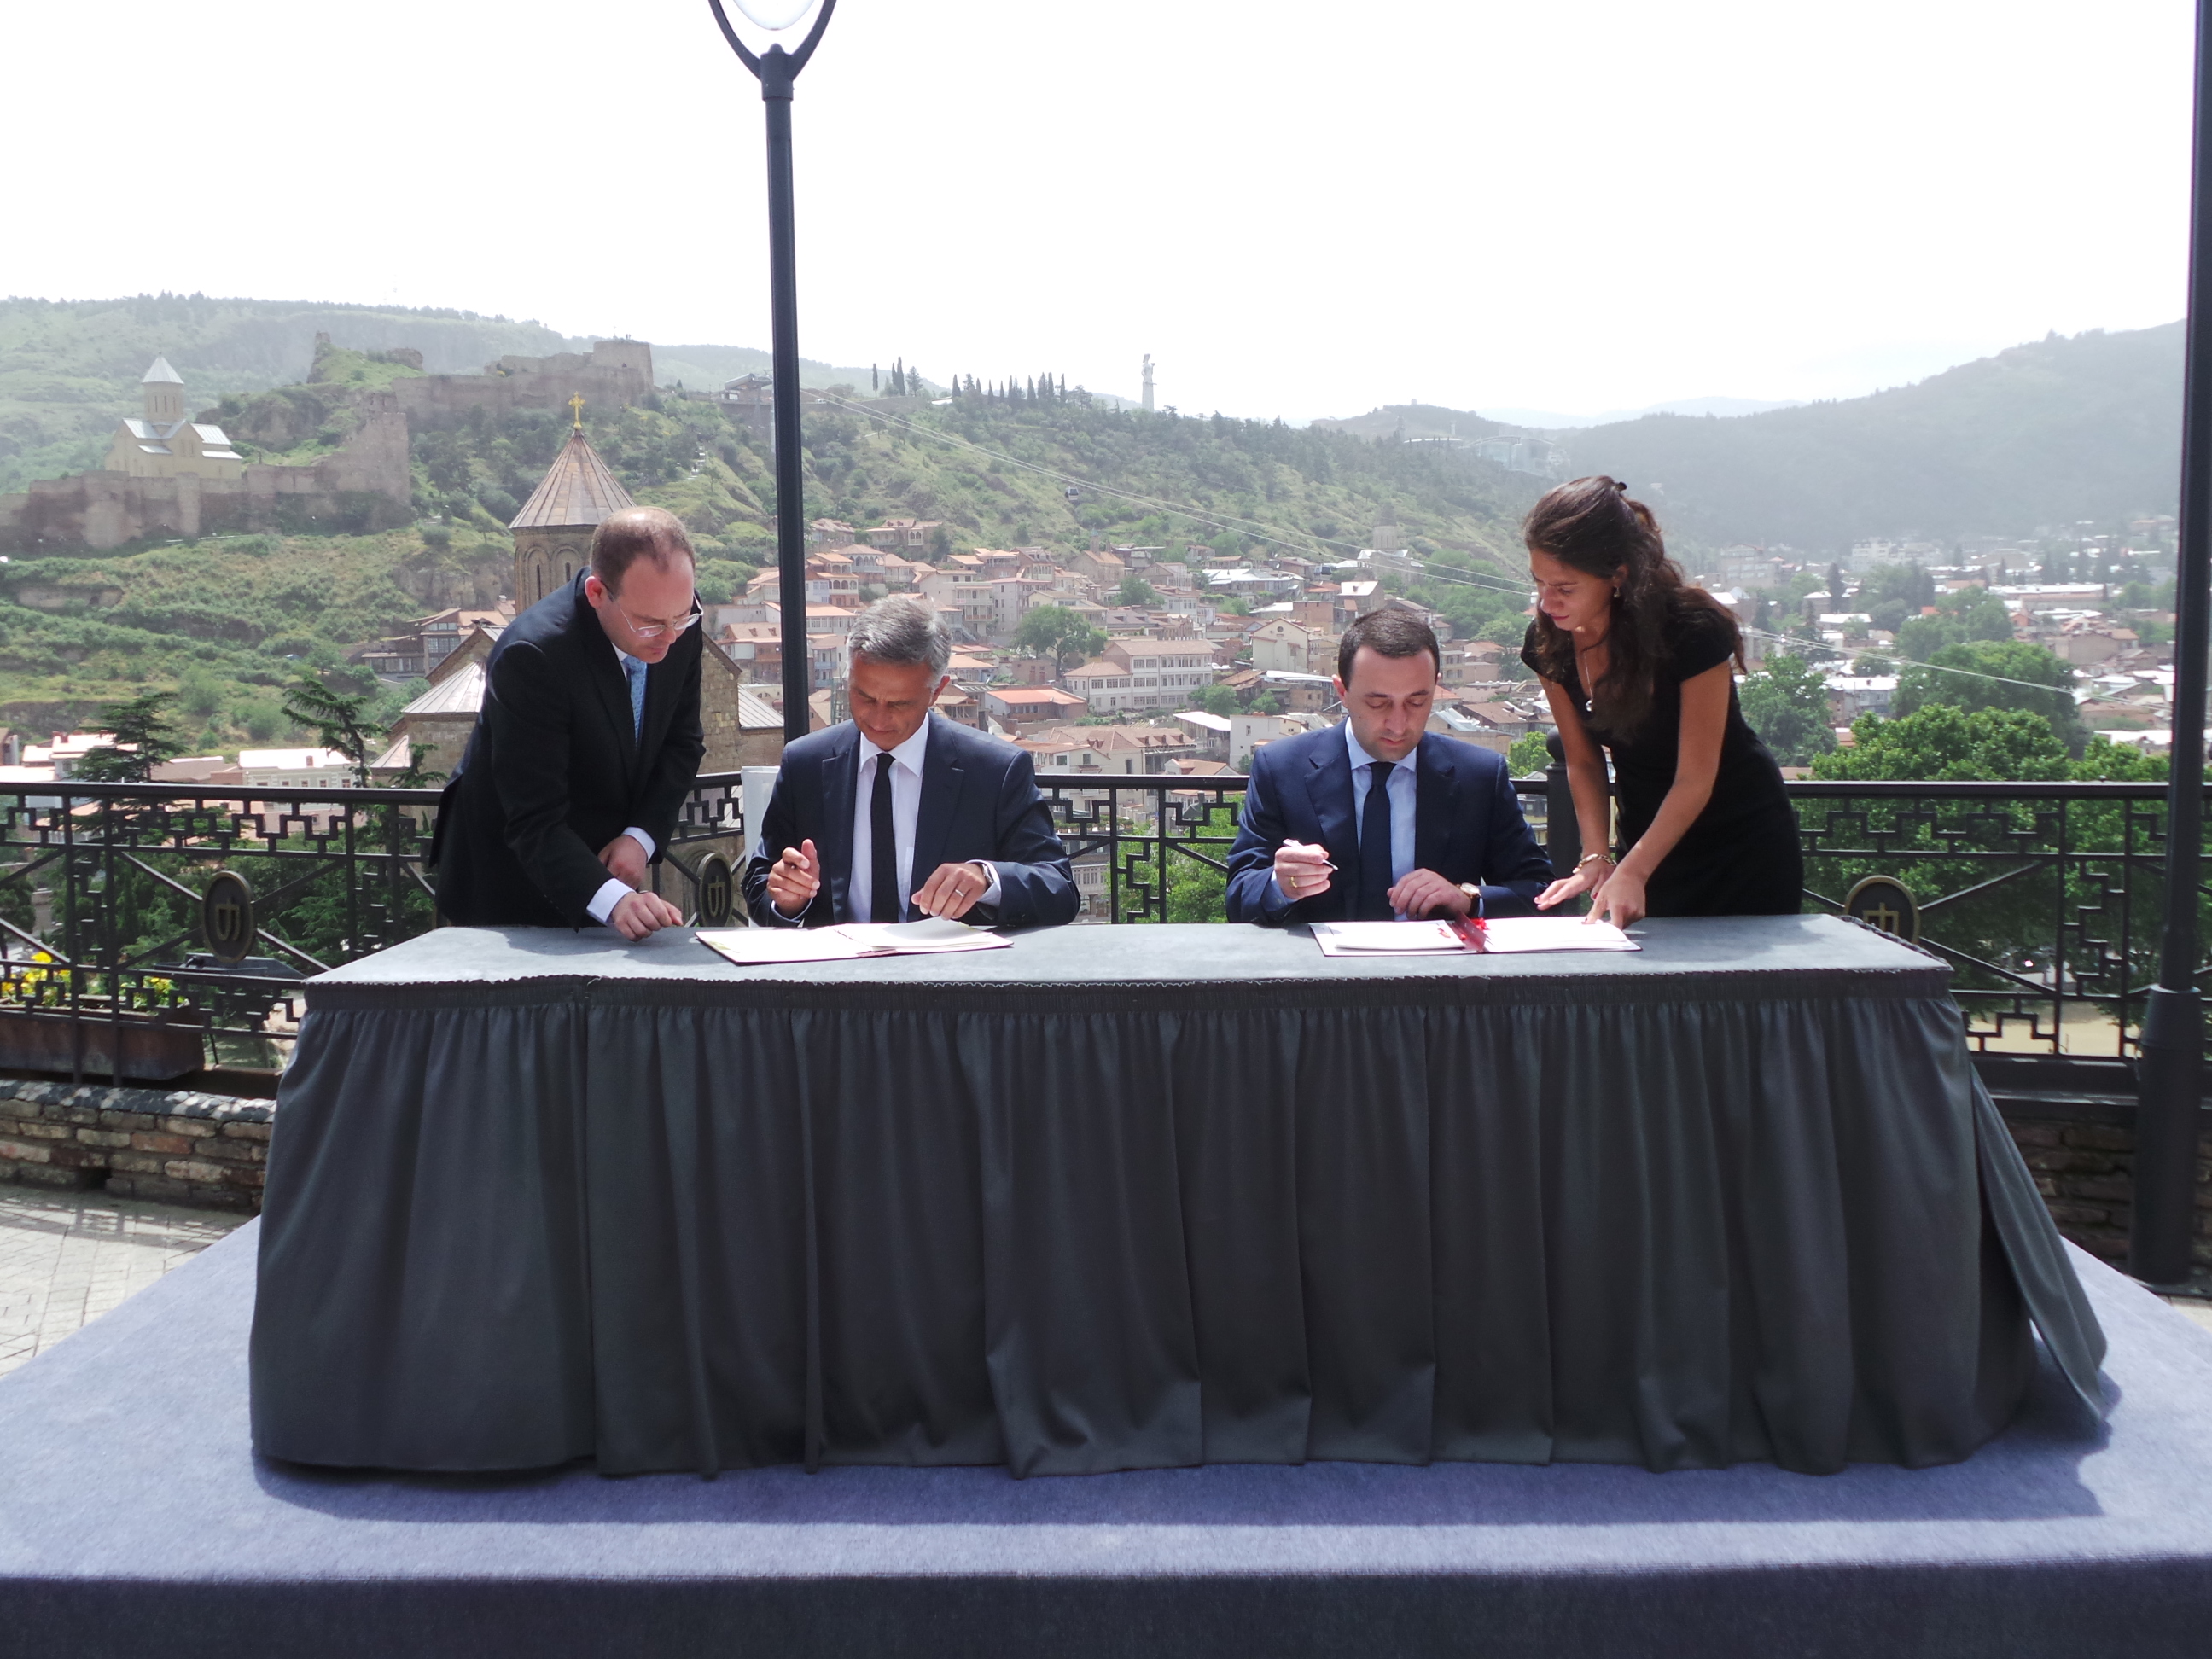 The President of the Swiss Confederation, Didier Burkhalter, and Georgian Prime Minister Irakli Garibashvili in Tbilisi, signing an investment protection treaty between Switzerland and Georgia. 